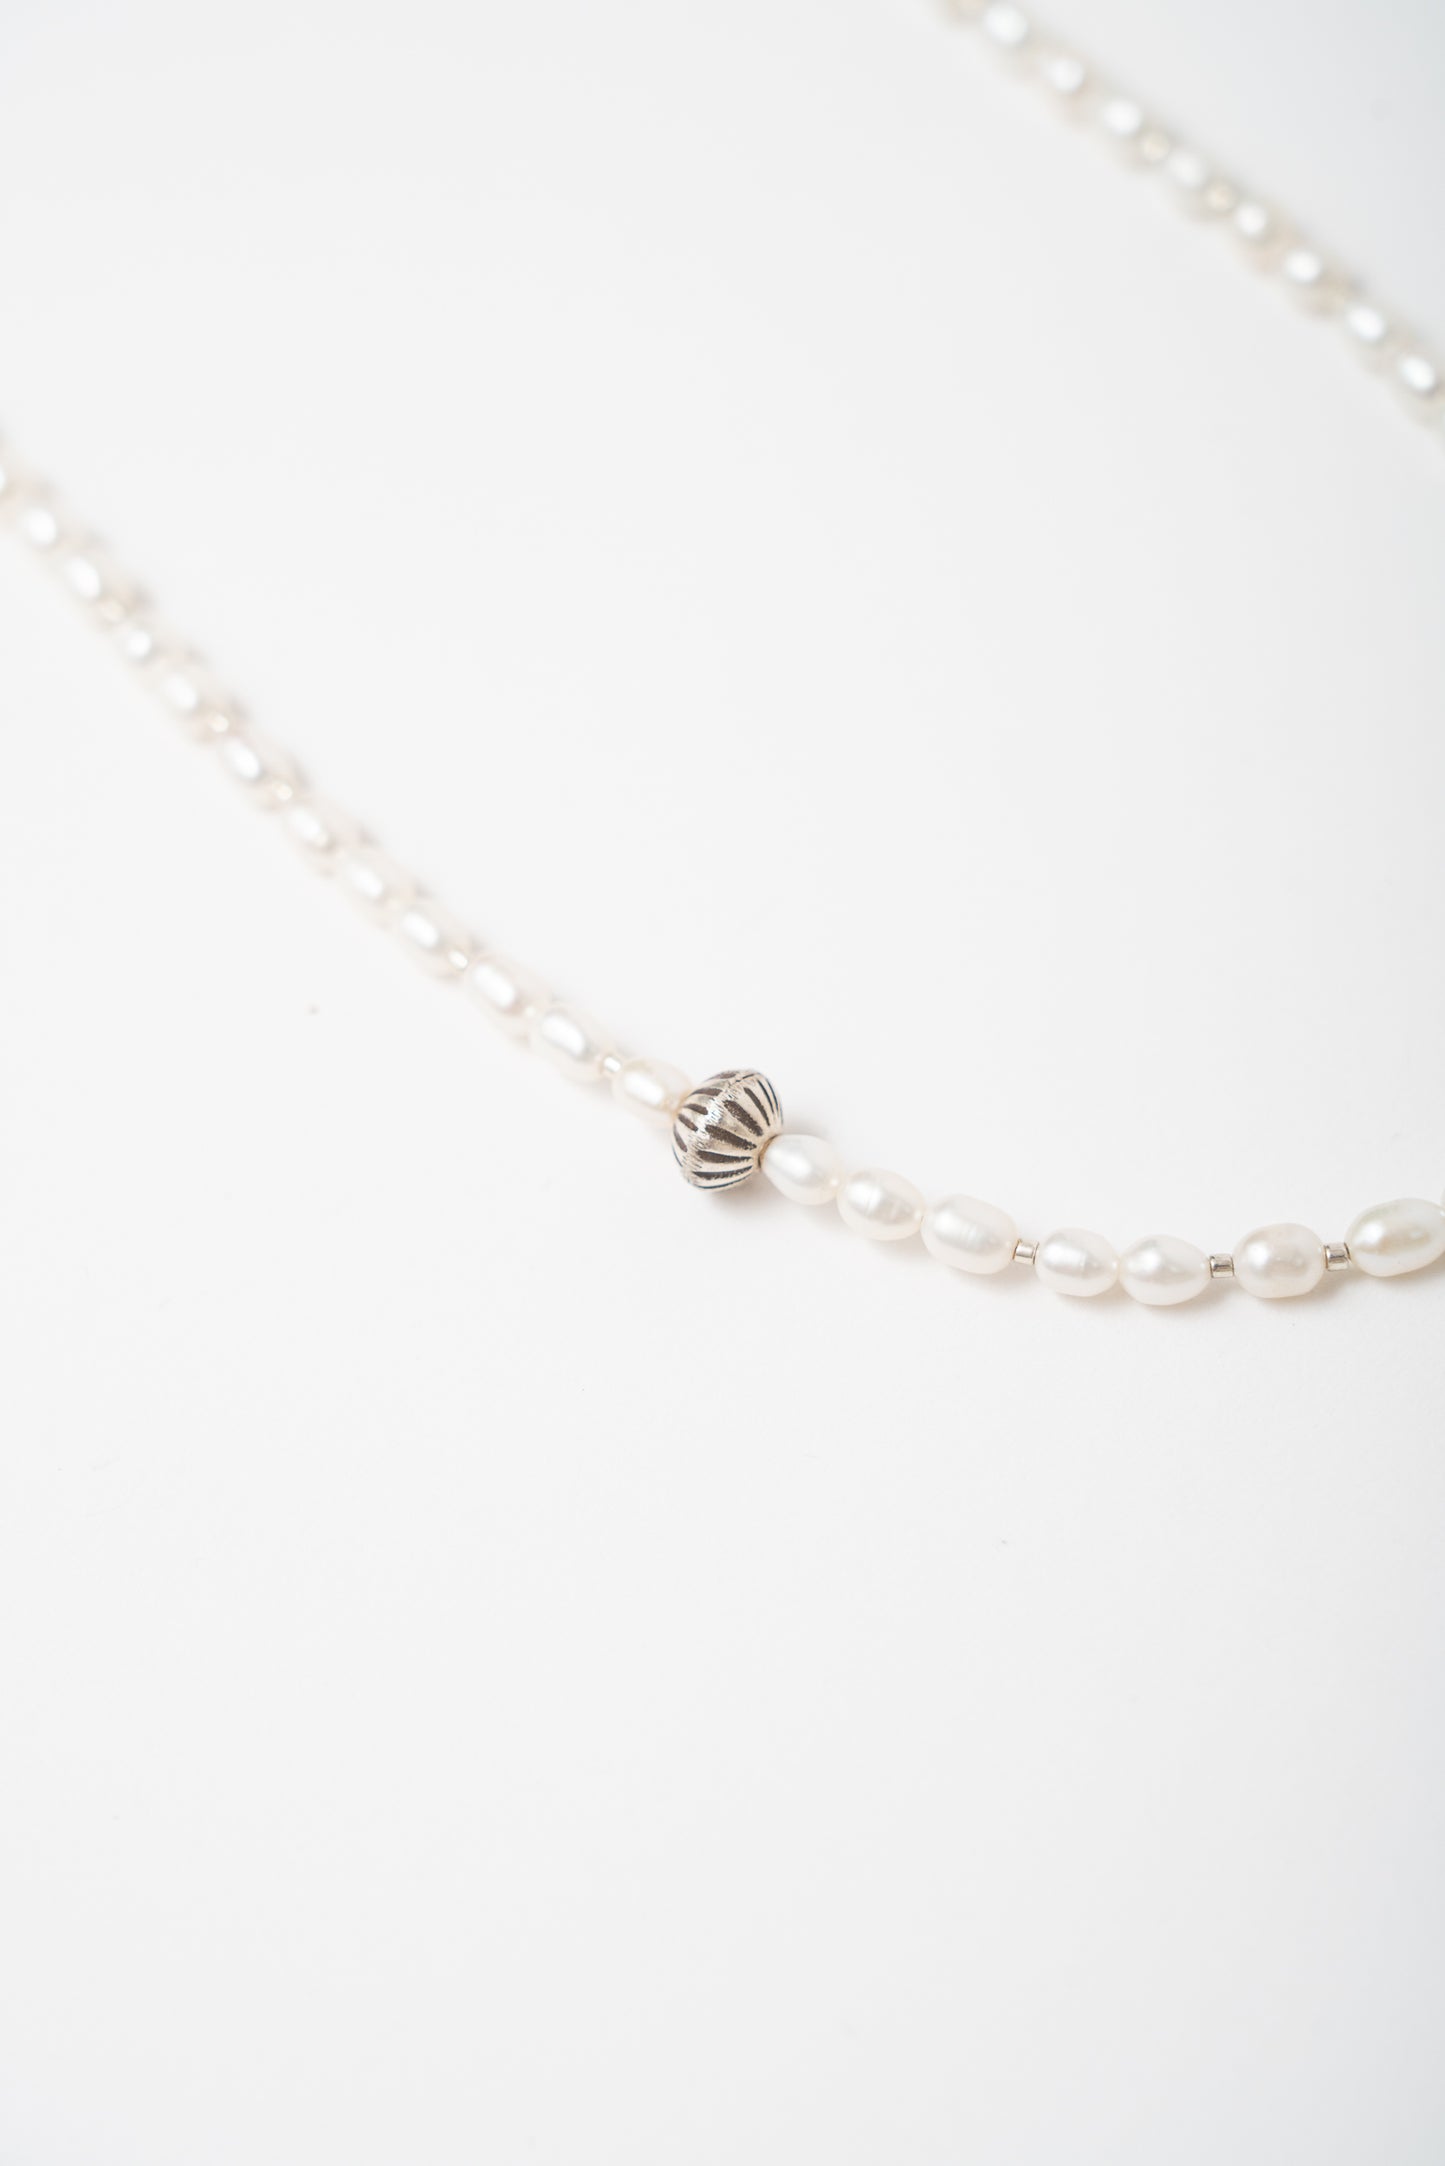 Freshwater Pearl + Silver Necklace 18"